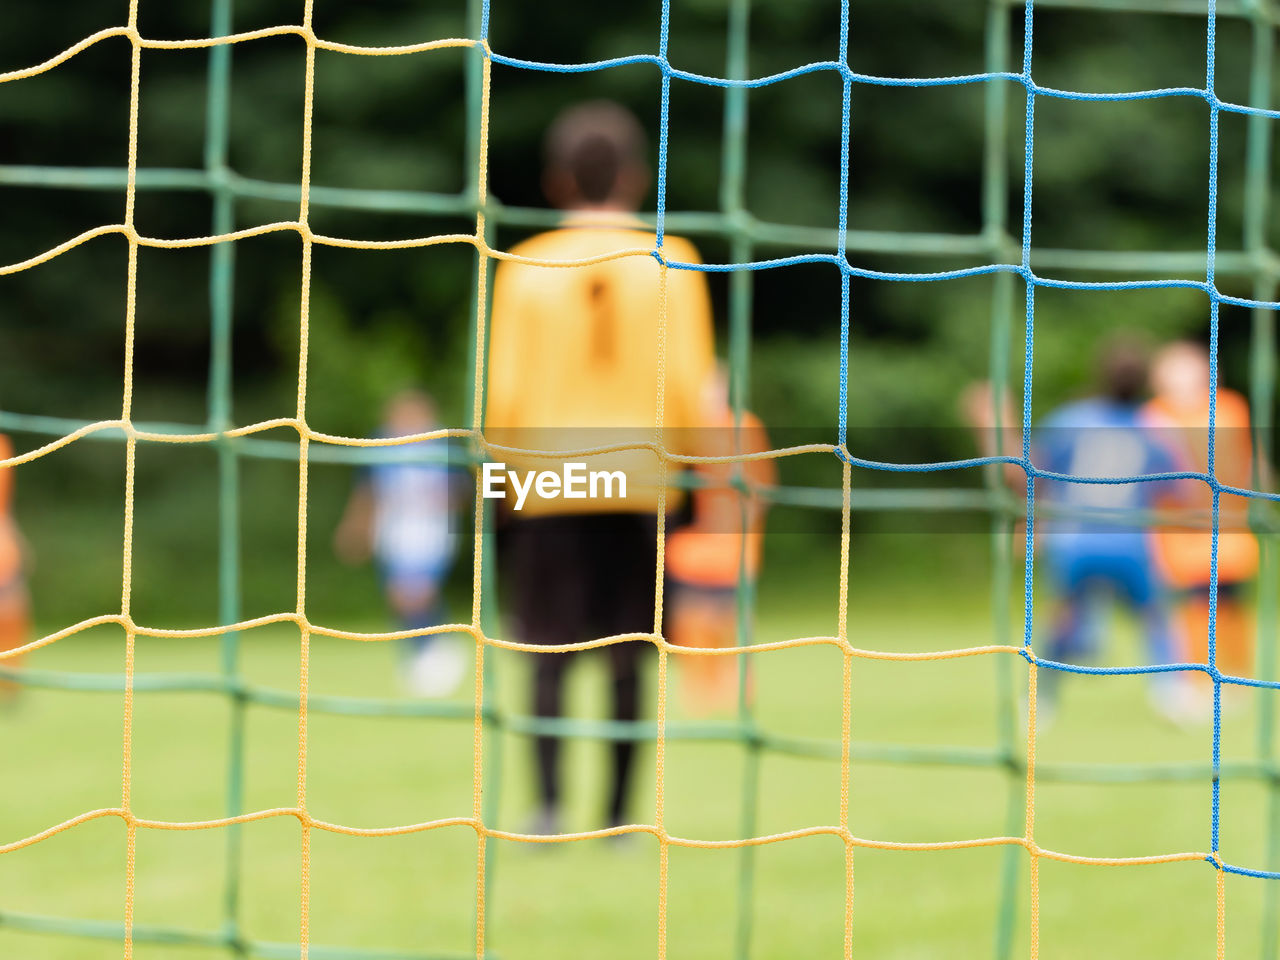 View through soccer gate net. g
oalkeeper slowly backs up during the opponents attack. abstract view